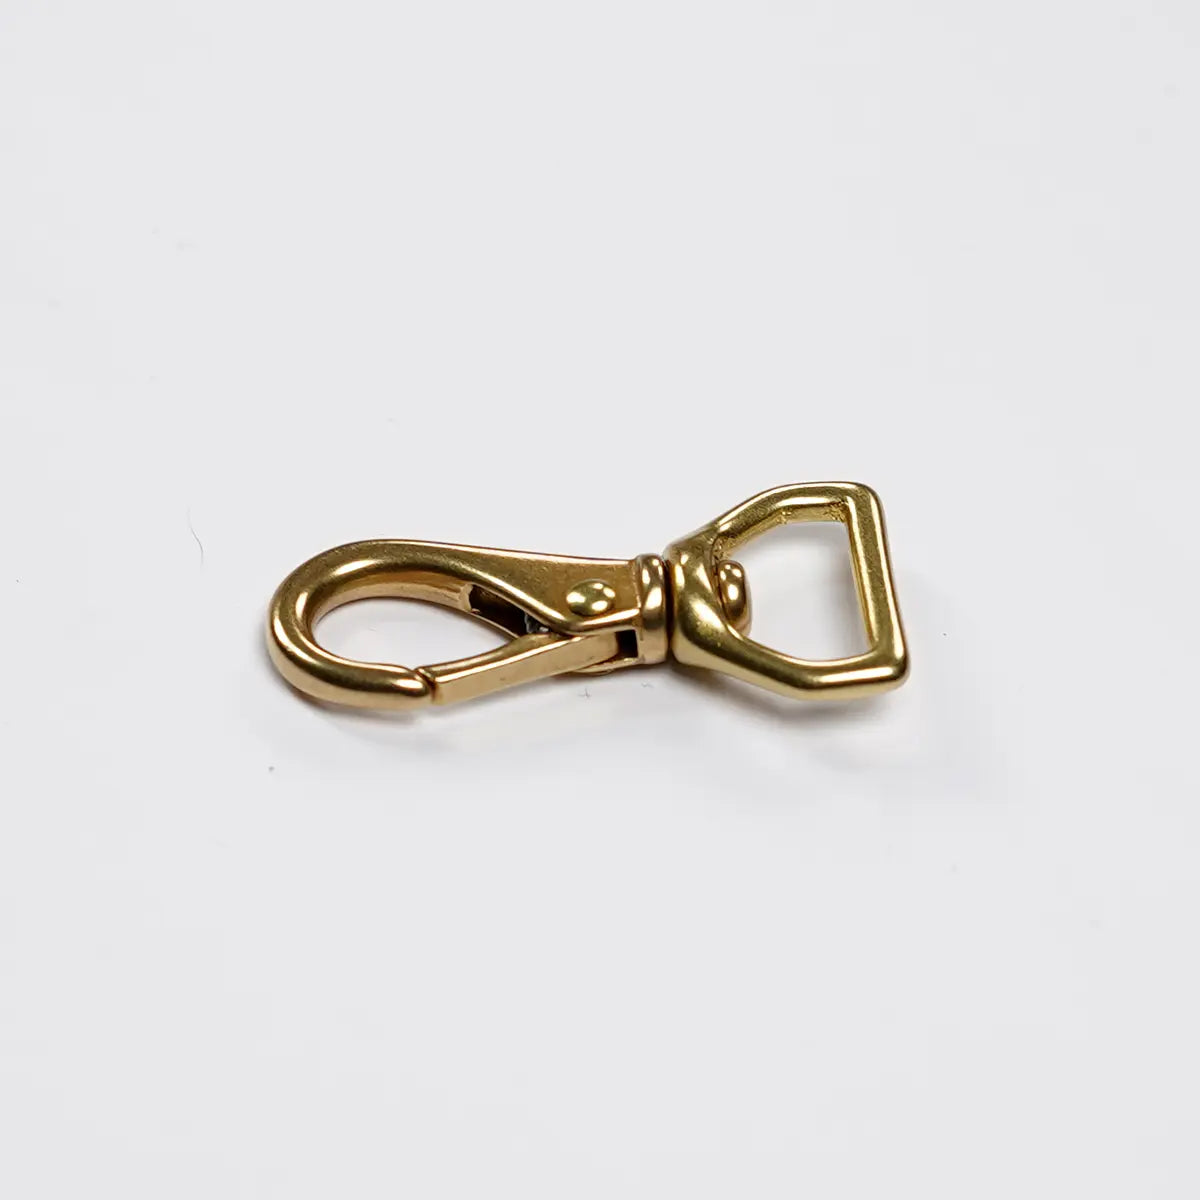 1/2" Small Swivel Snap Solid Brass